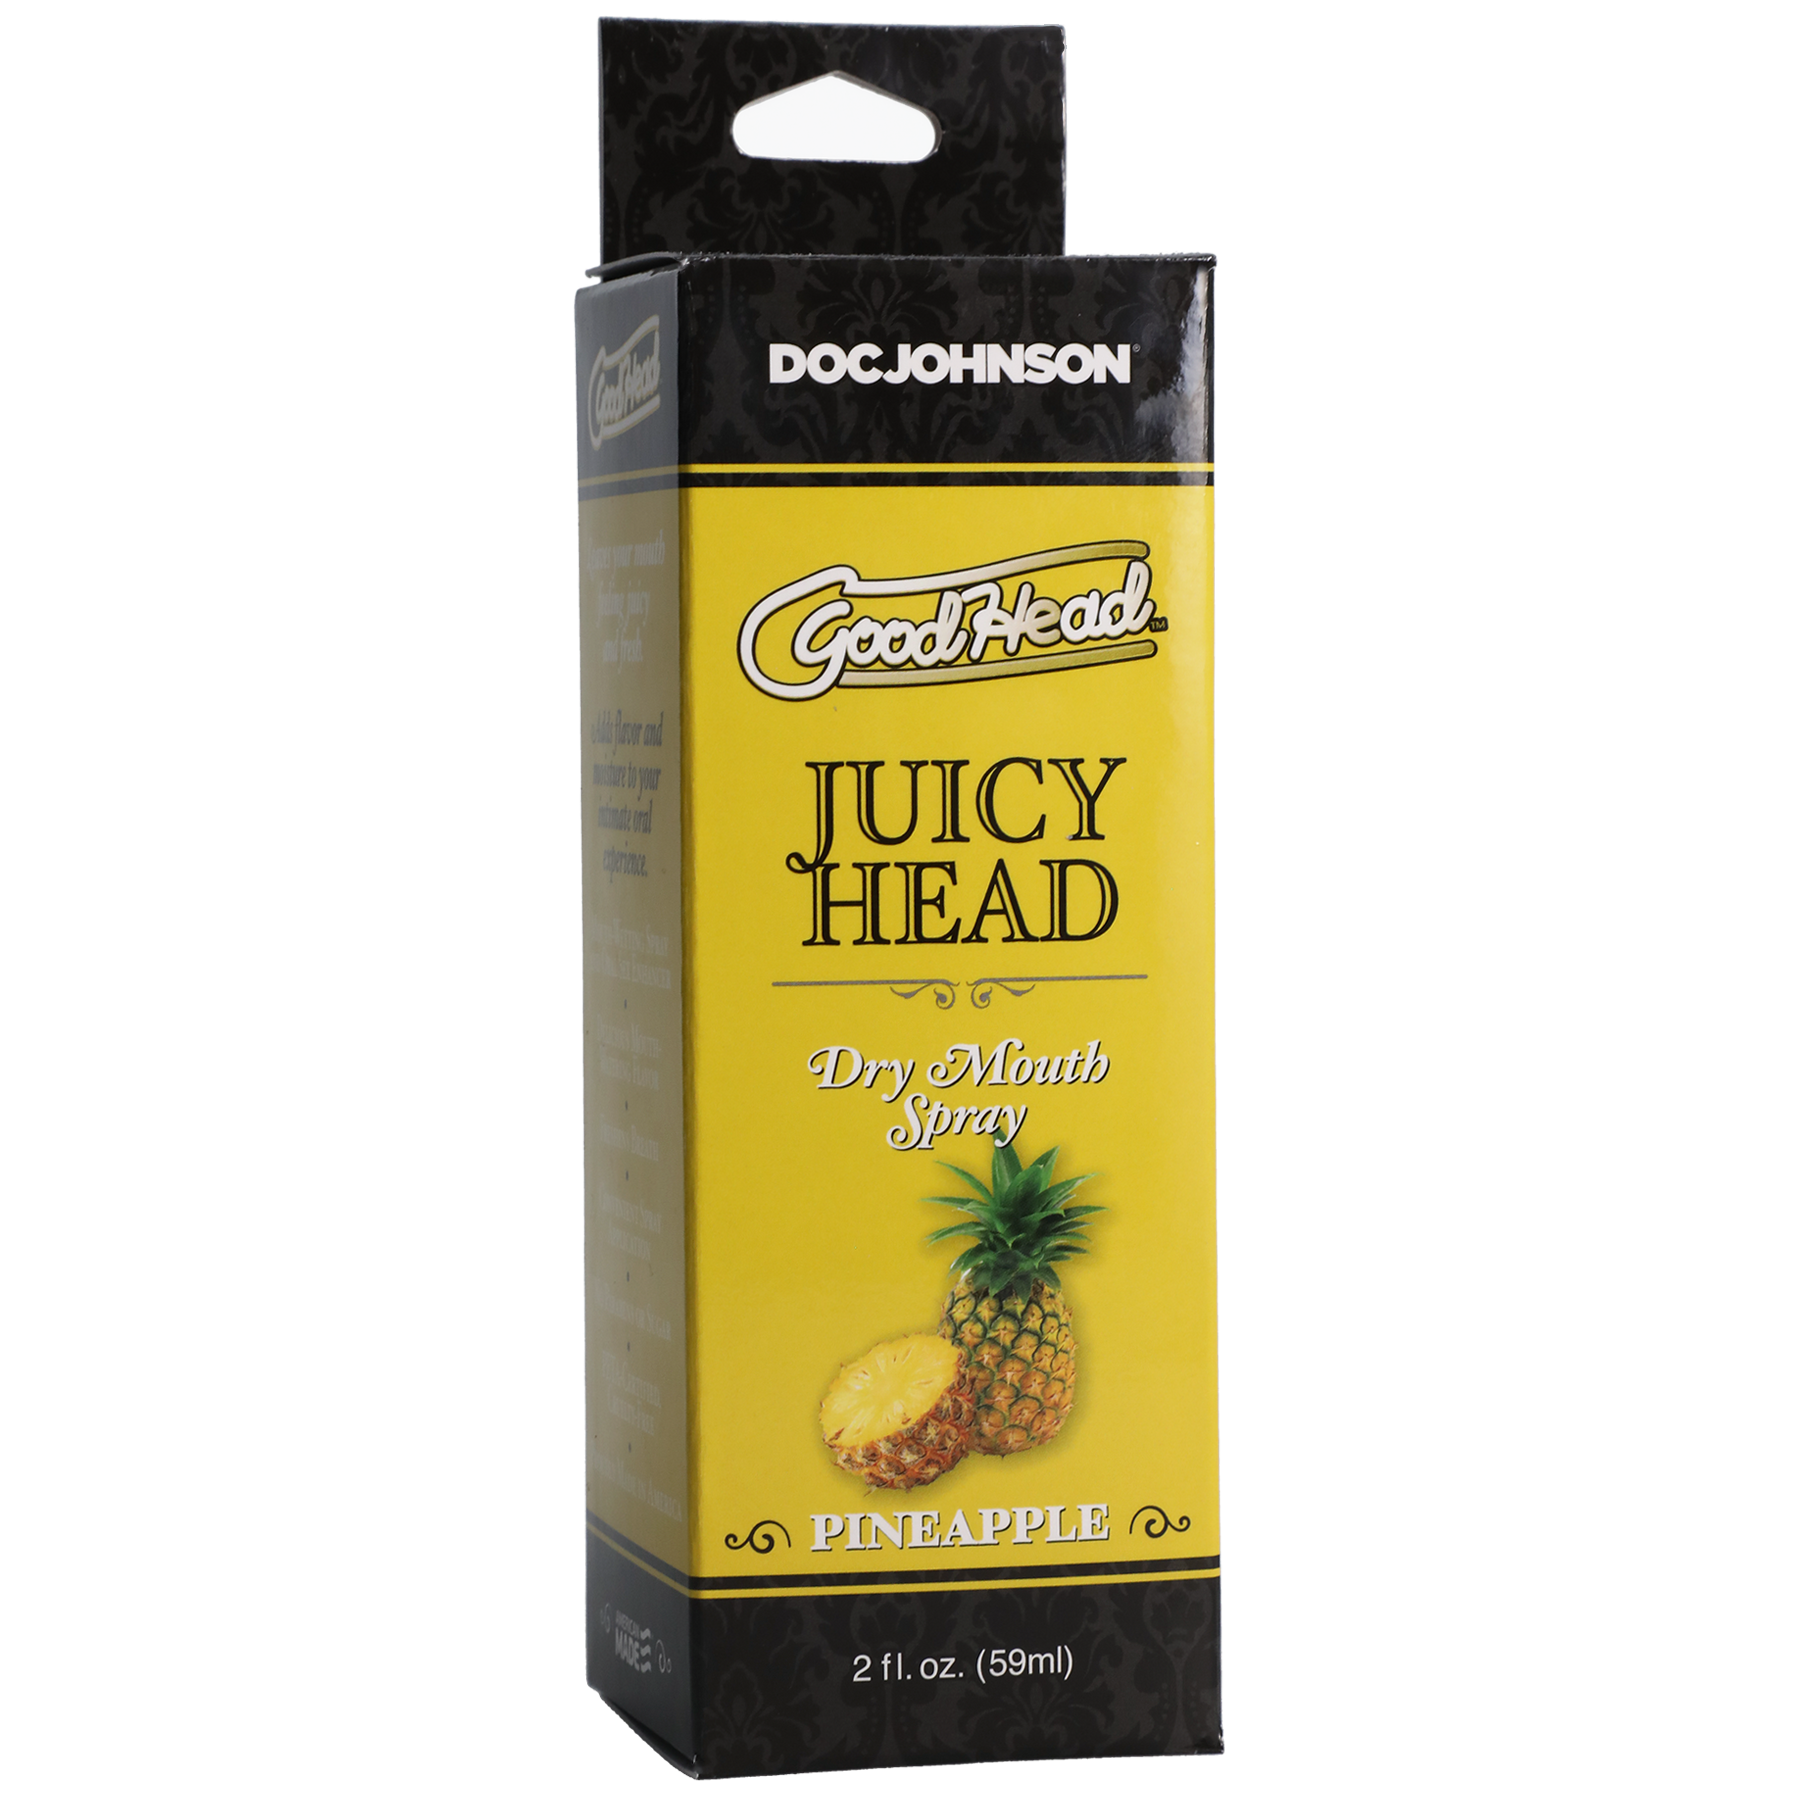 Photo of the package for the GoodHead Juicy Head from Doc Johnson (pineapple).